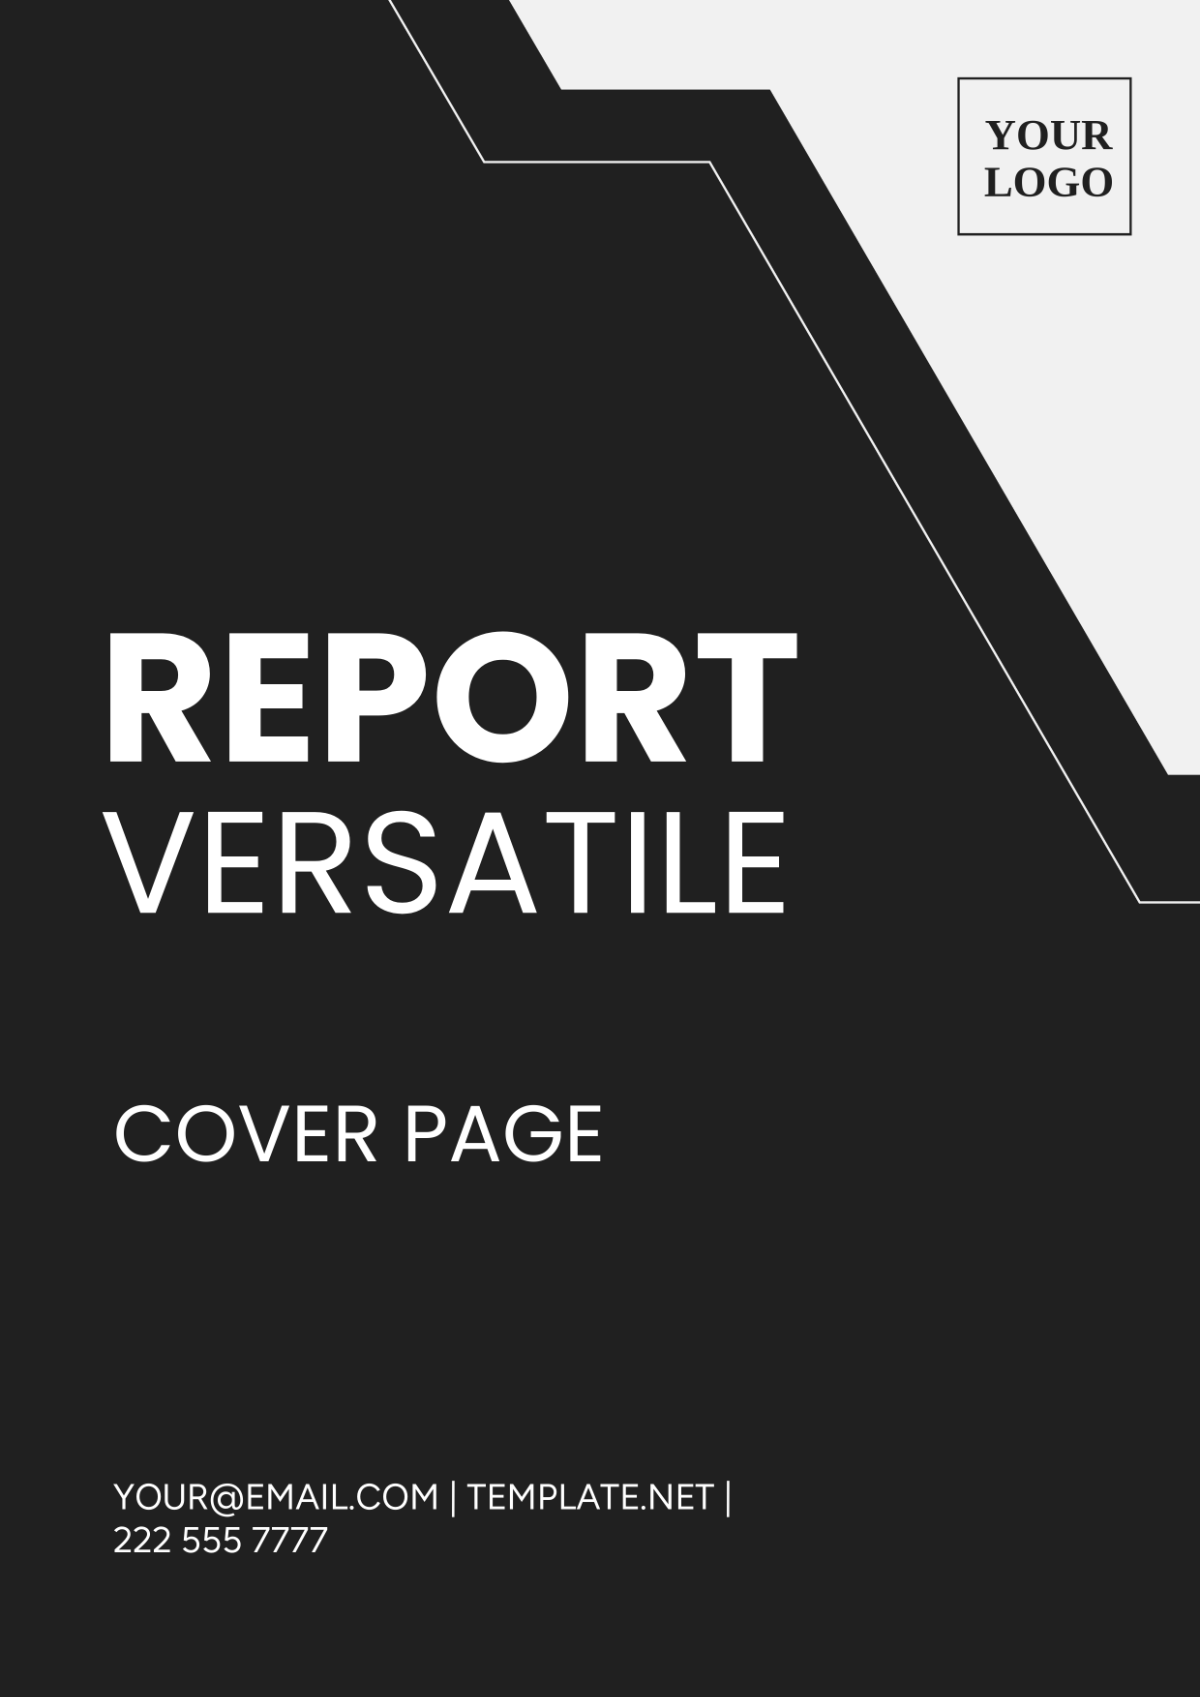 Report Versatile Cover Page Template